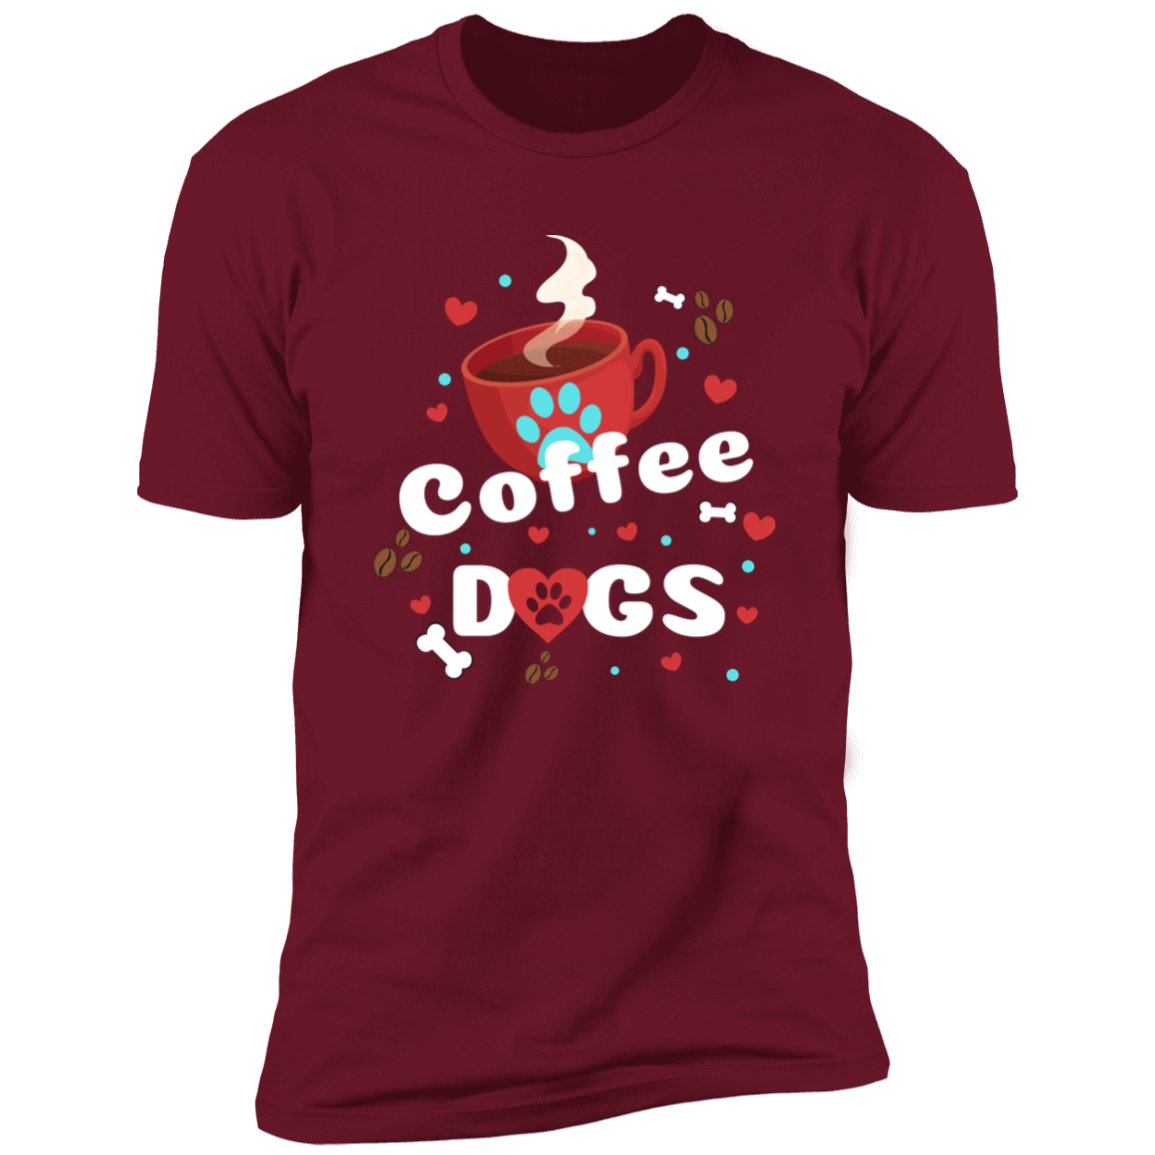 Coffee Dogs T-shirt, Dog Shirt for humans, in cardinal red 